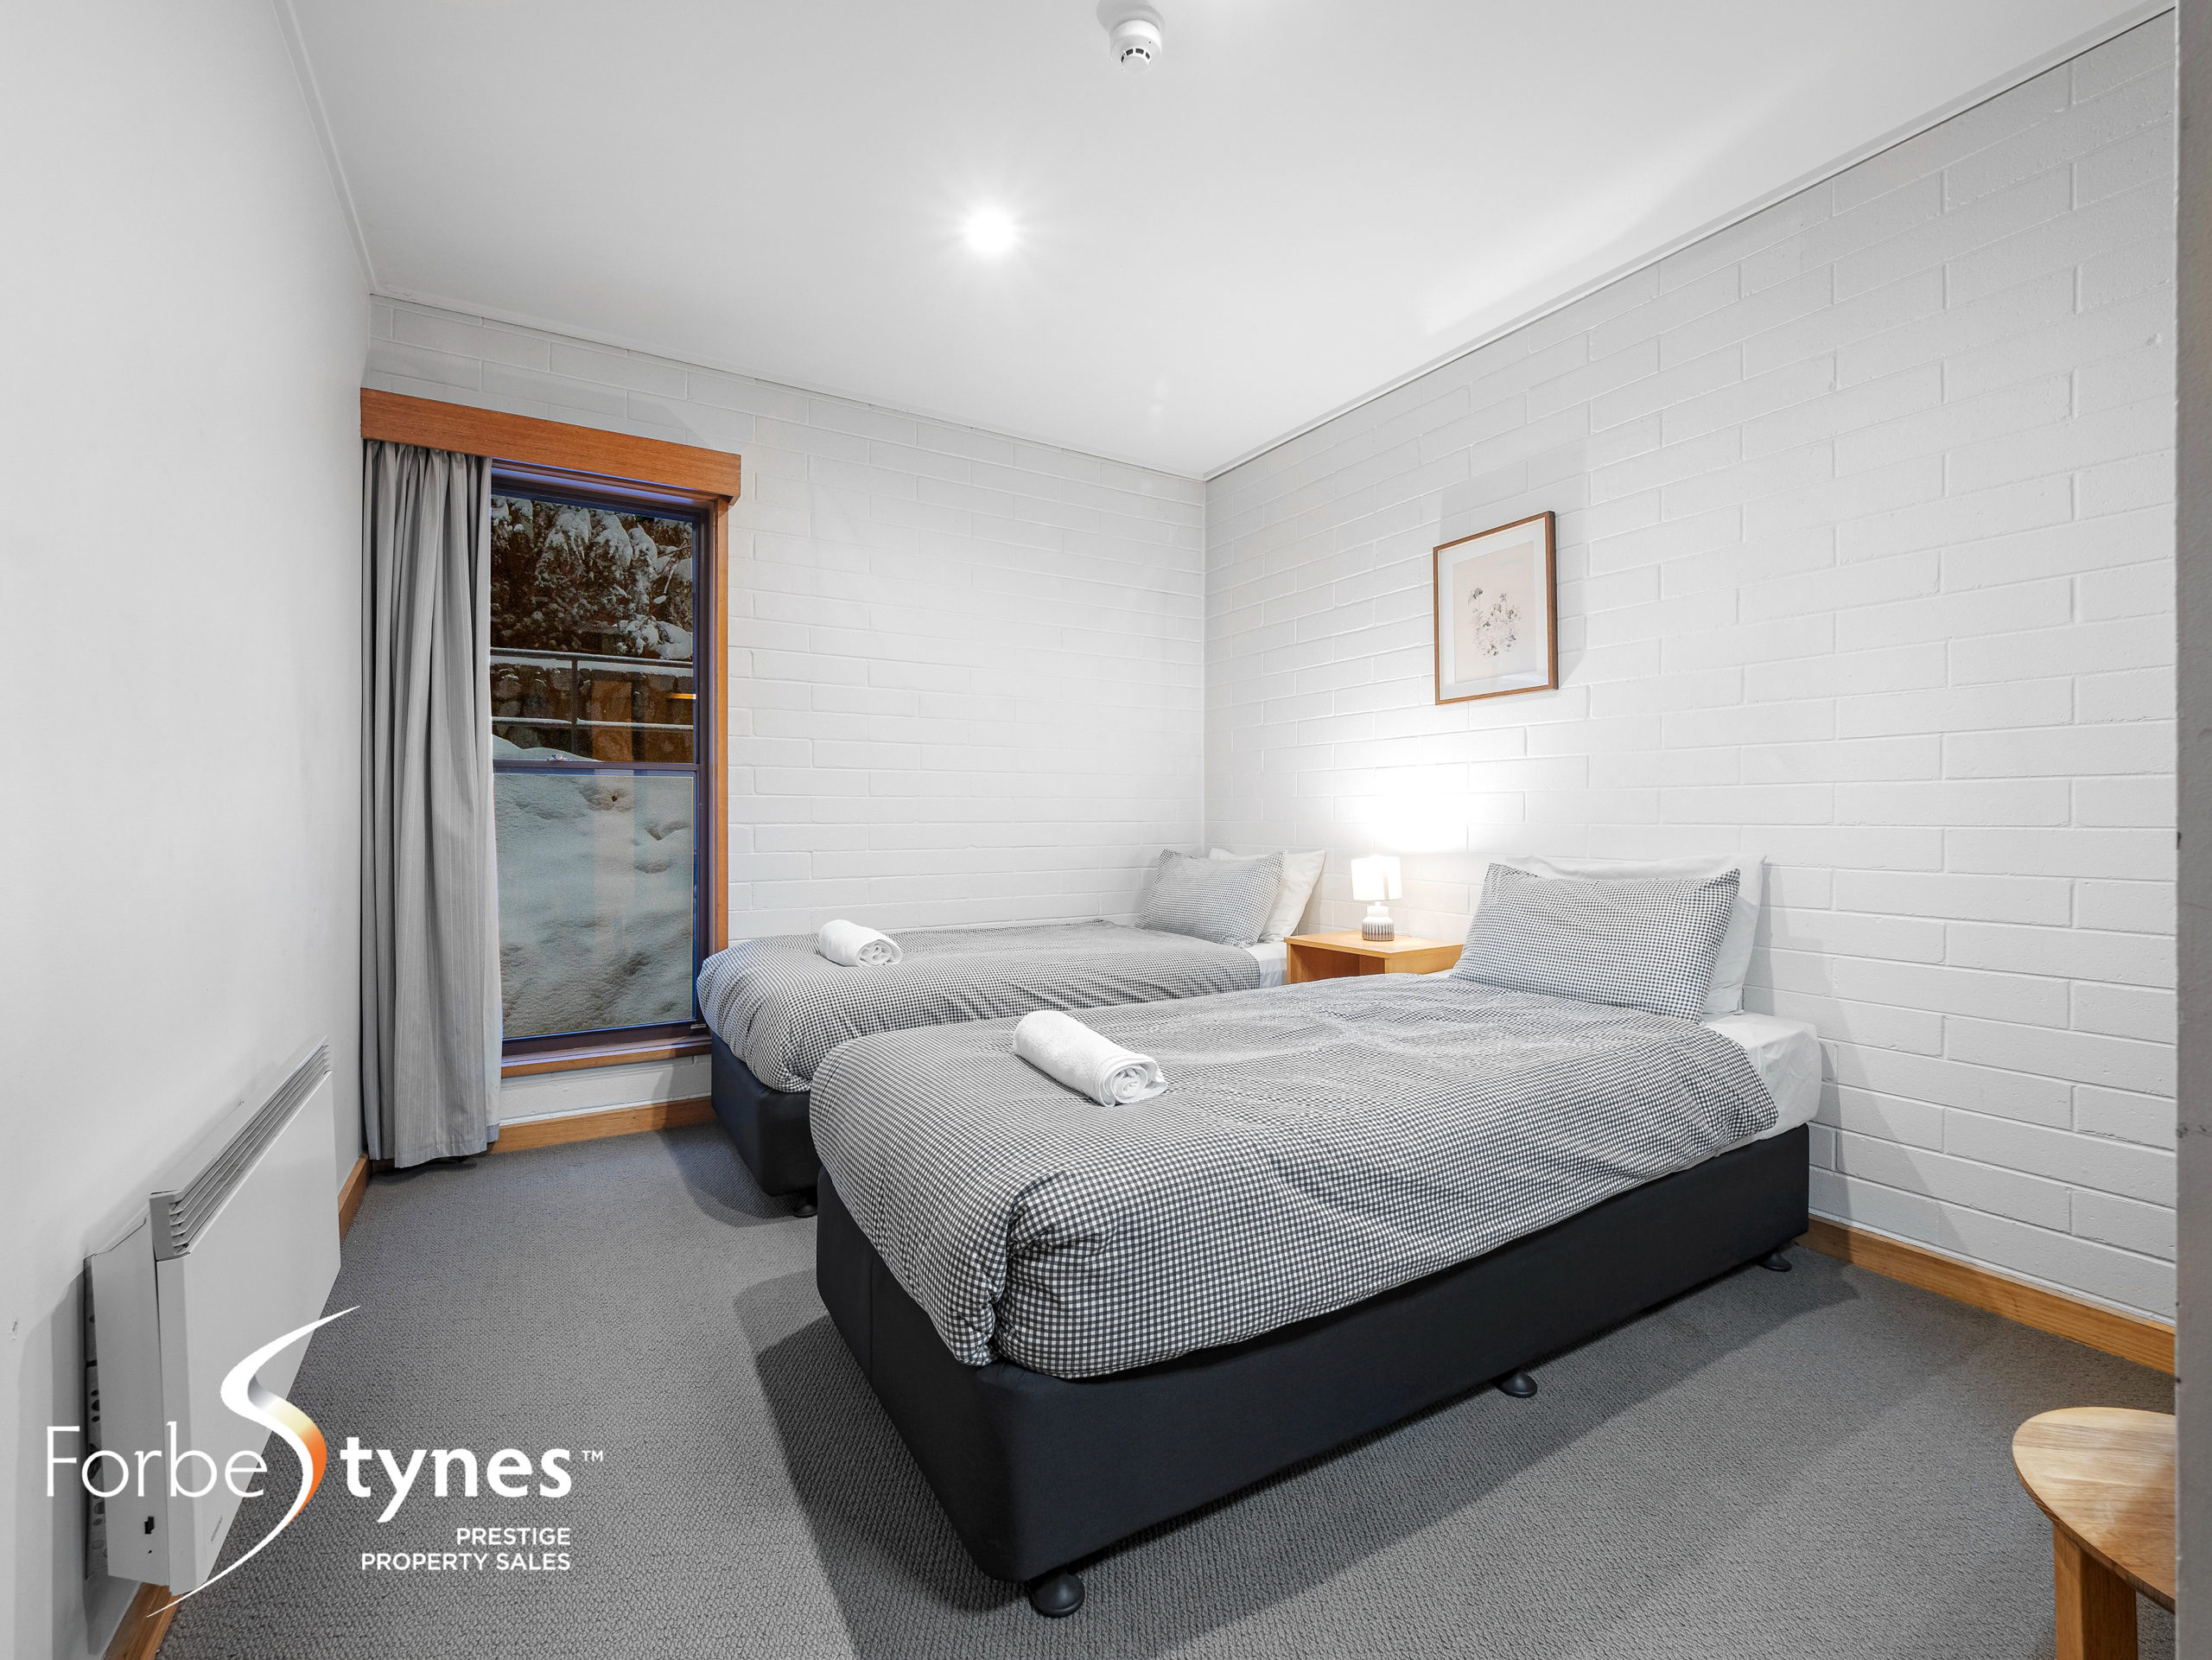 A Rare Find! Modernized Three Bedroom Thredbo Alpine Apartment – Expressions of Interest – Over $2,000,000